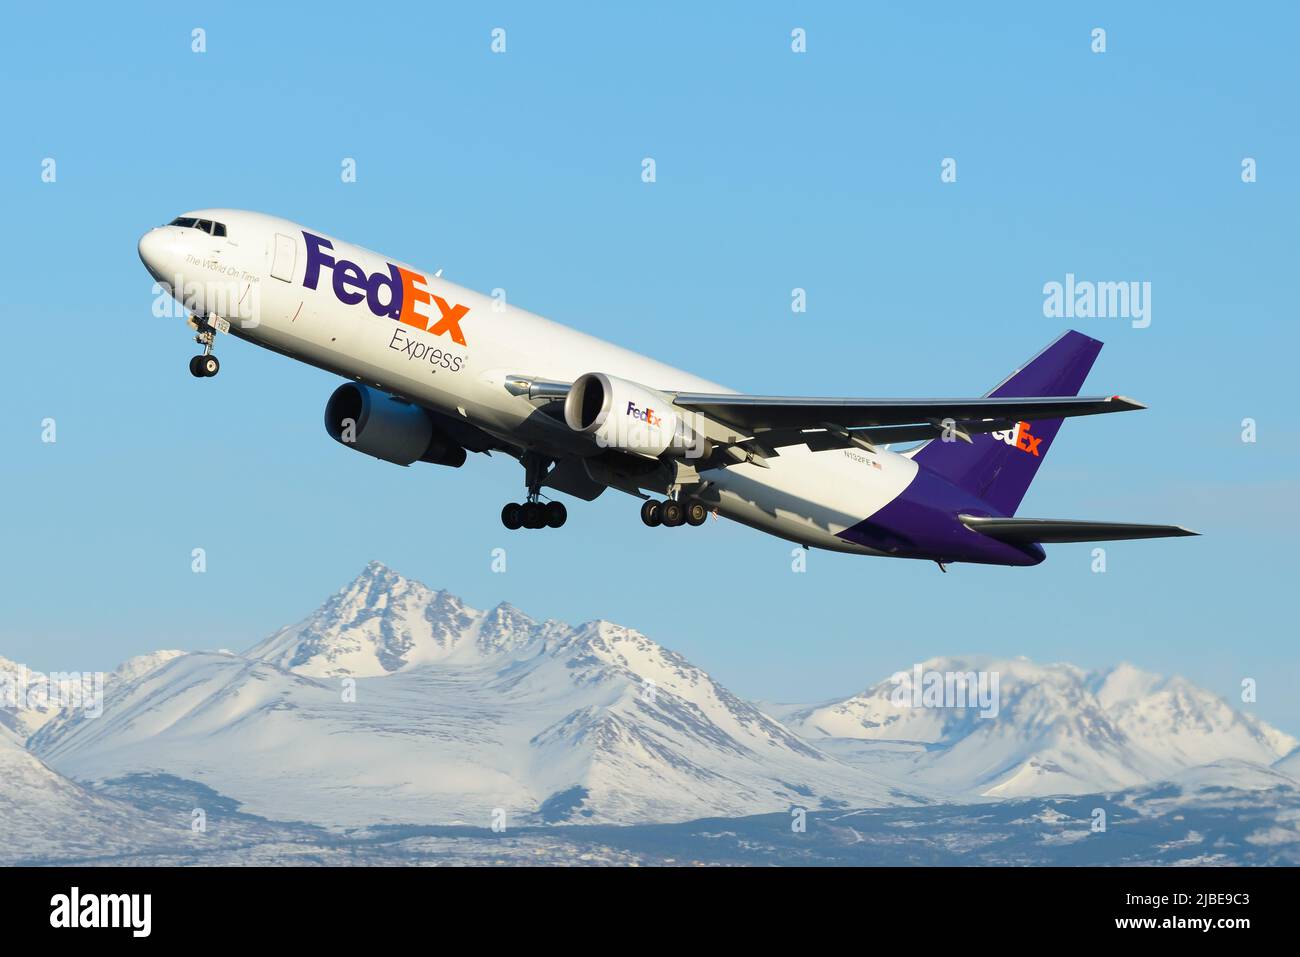 FedEx Boeing 767 cargo airplane taking off from Anchorage. Aircraft to carry freight of Fedex. B767-300F also know as 767F. Stock Photo